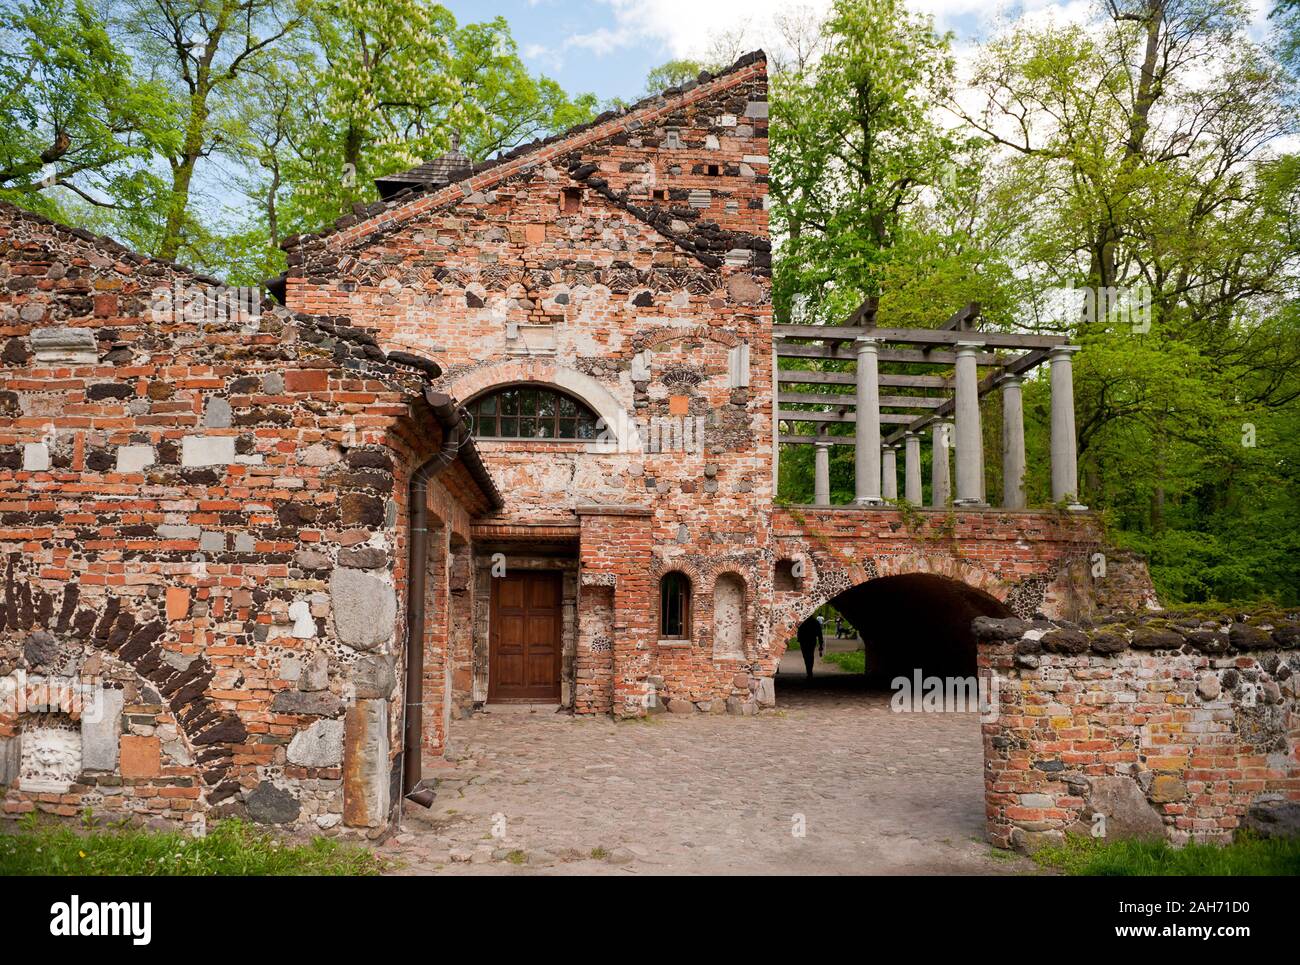 Przybytek Arcykapłana outside view, the High Priest Sanctuary building in the Romantic Park in Arkadia, Poland, Europe, red bricks architecture, visit Stock Photo